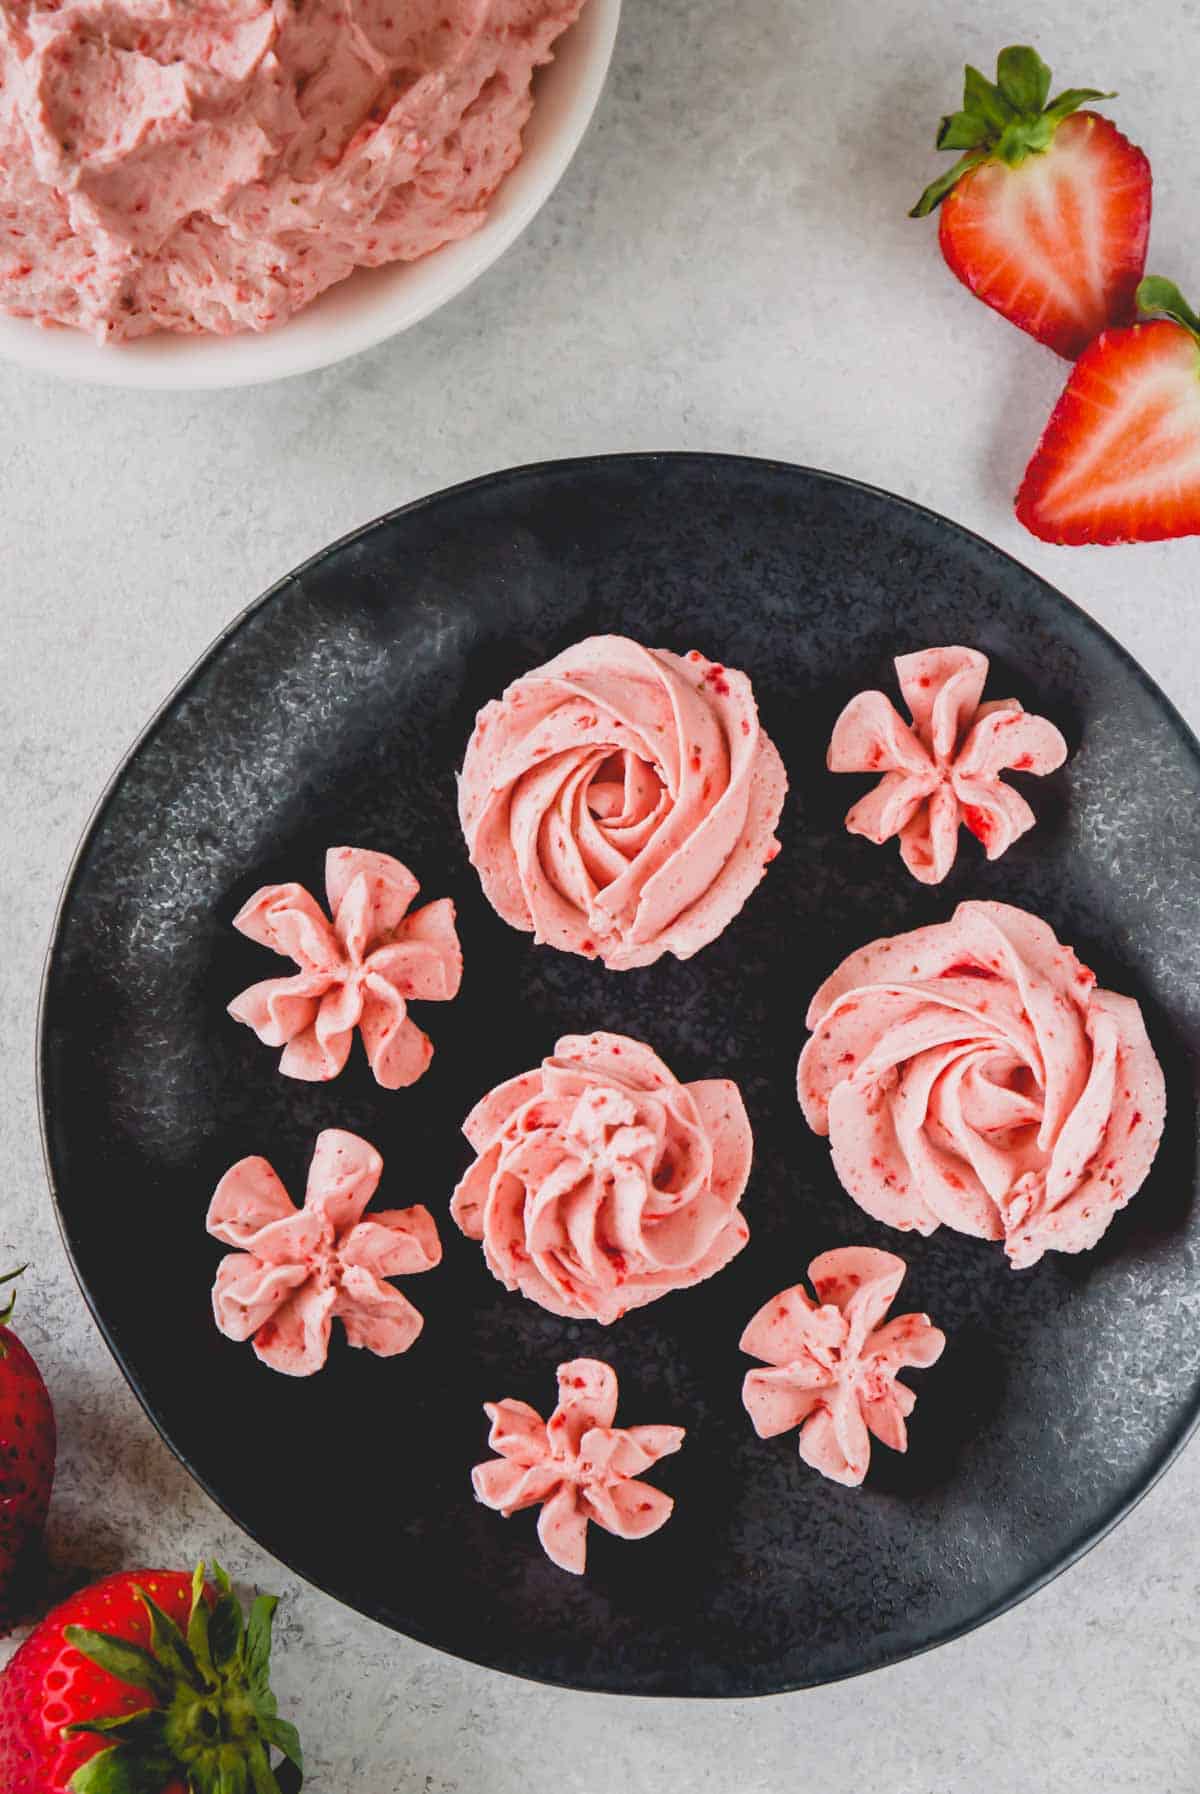 Overhead image of pink rosettes made of strawberry whipped cream frosting on a plate.